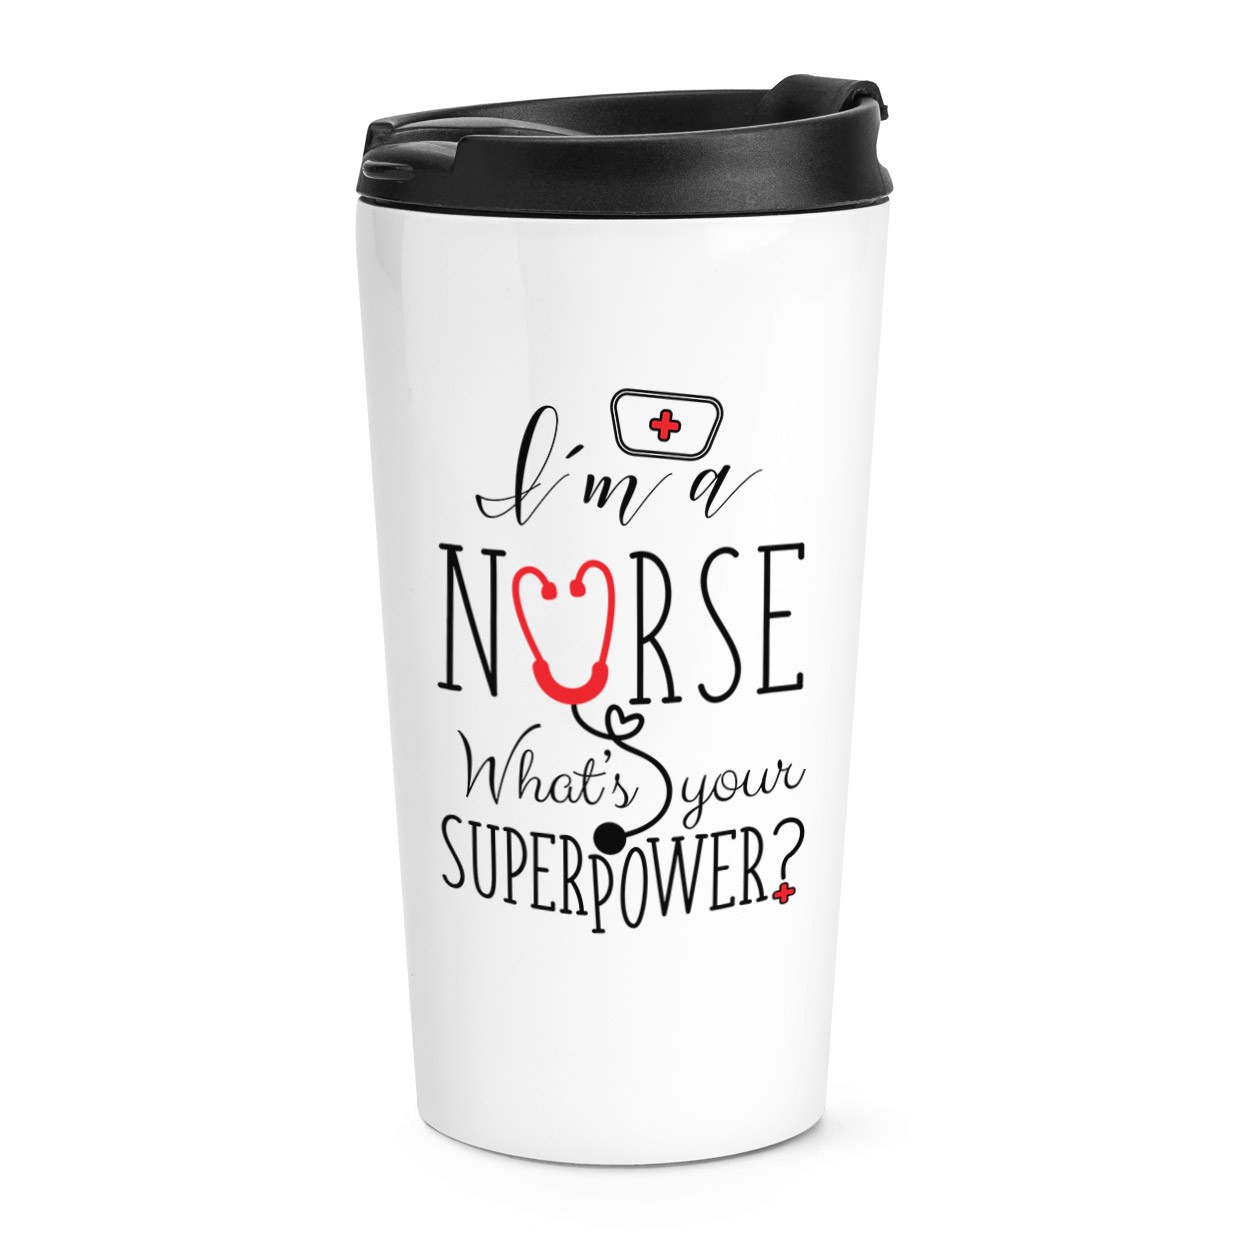 I'm A Nurse What's Your Superpower Travel Mug Cup